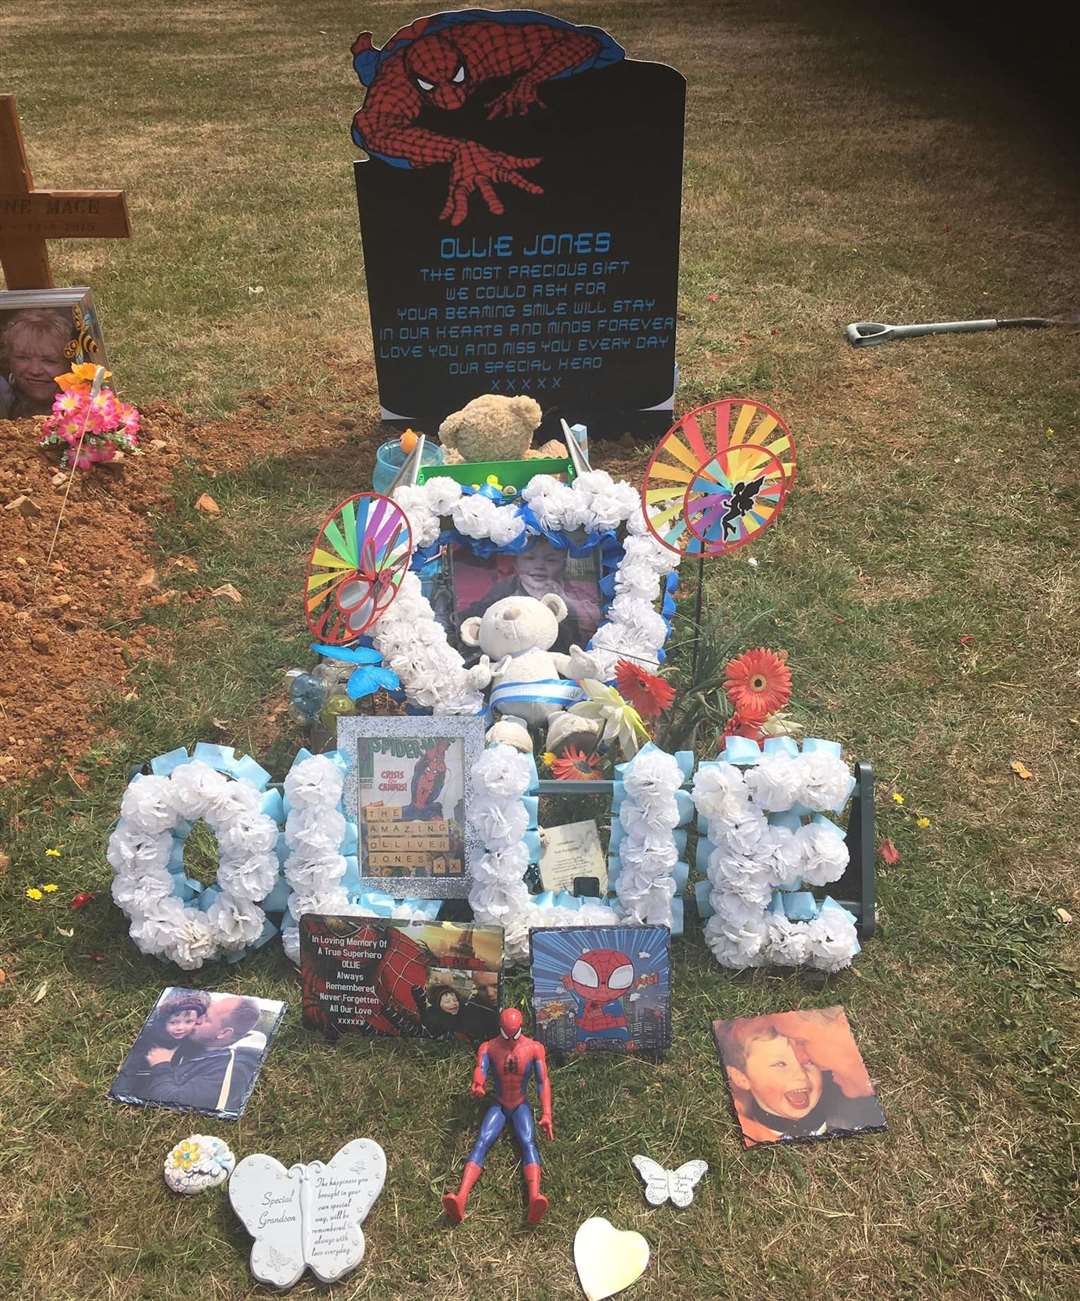 Lloyd Jones put up a temporary Spider-Man marker at his son Ollie's grave in Maidstone